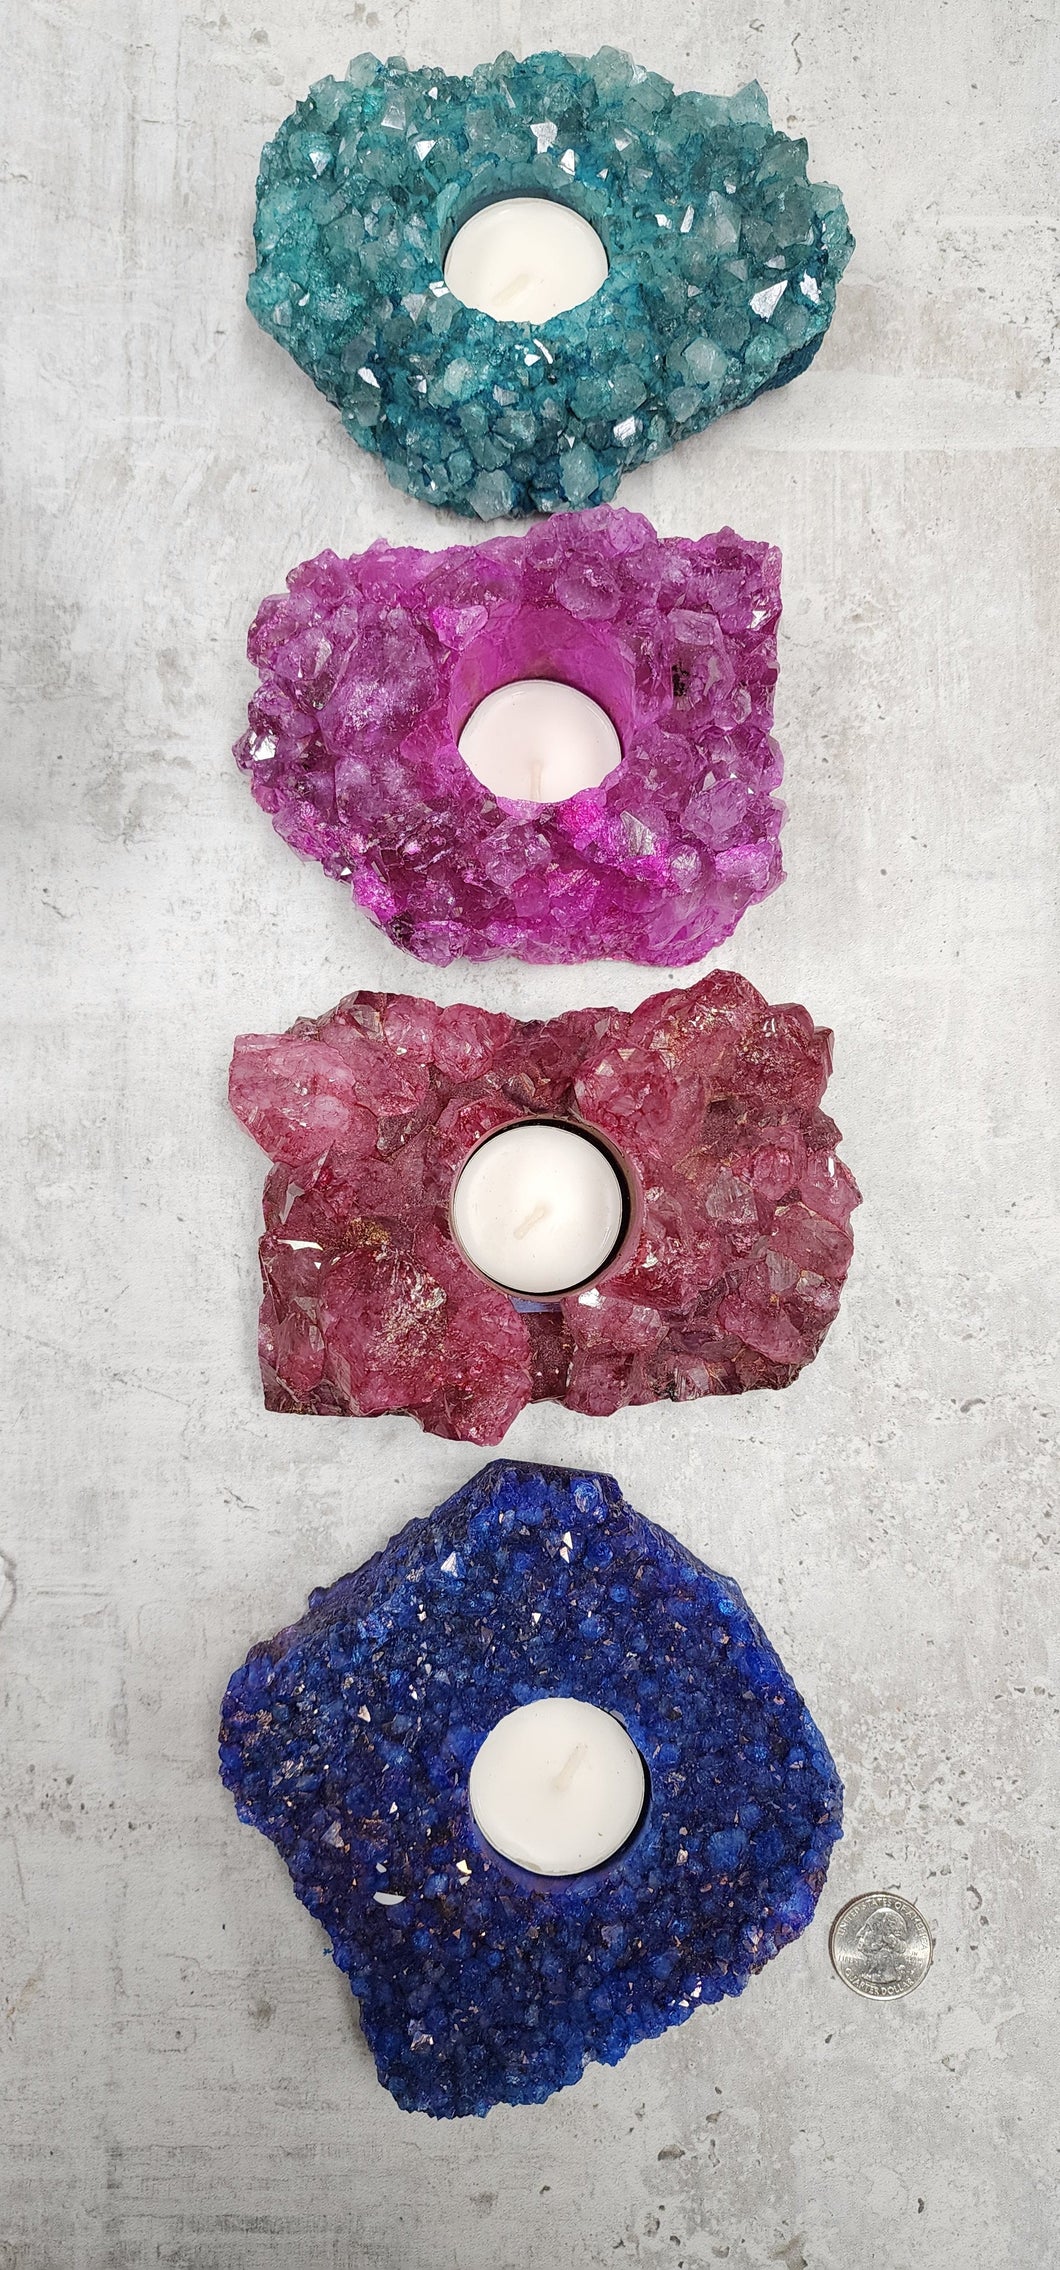 Dyed Amethyst Candle Holder